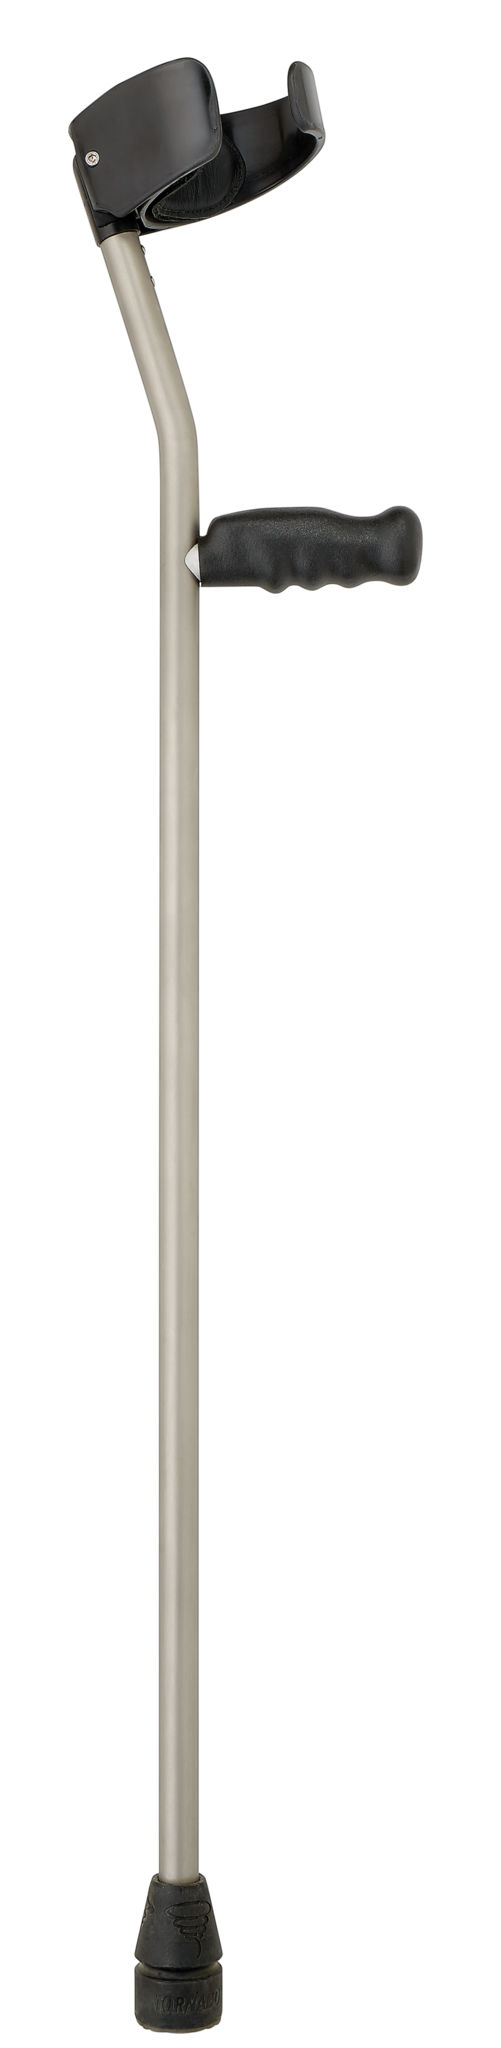 Crutch PNG image free Download 